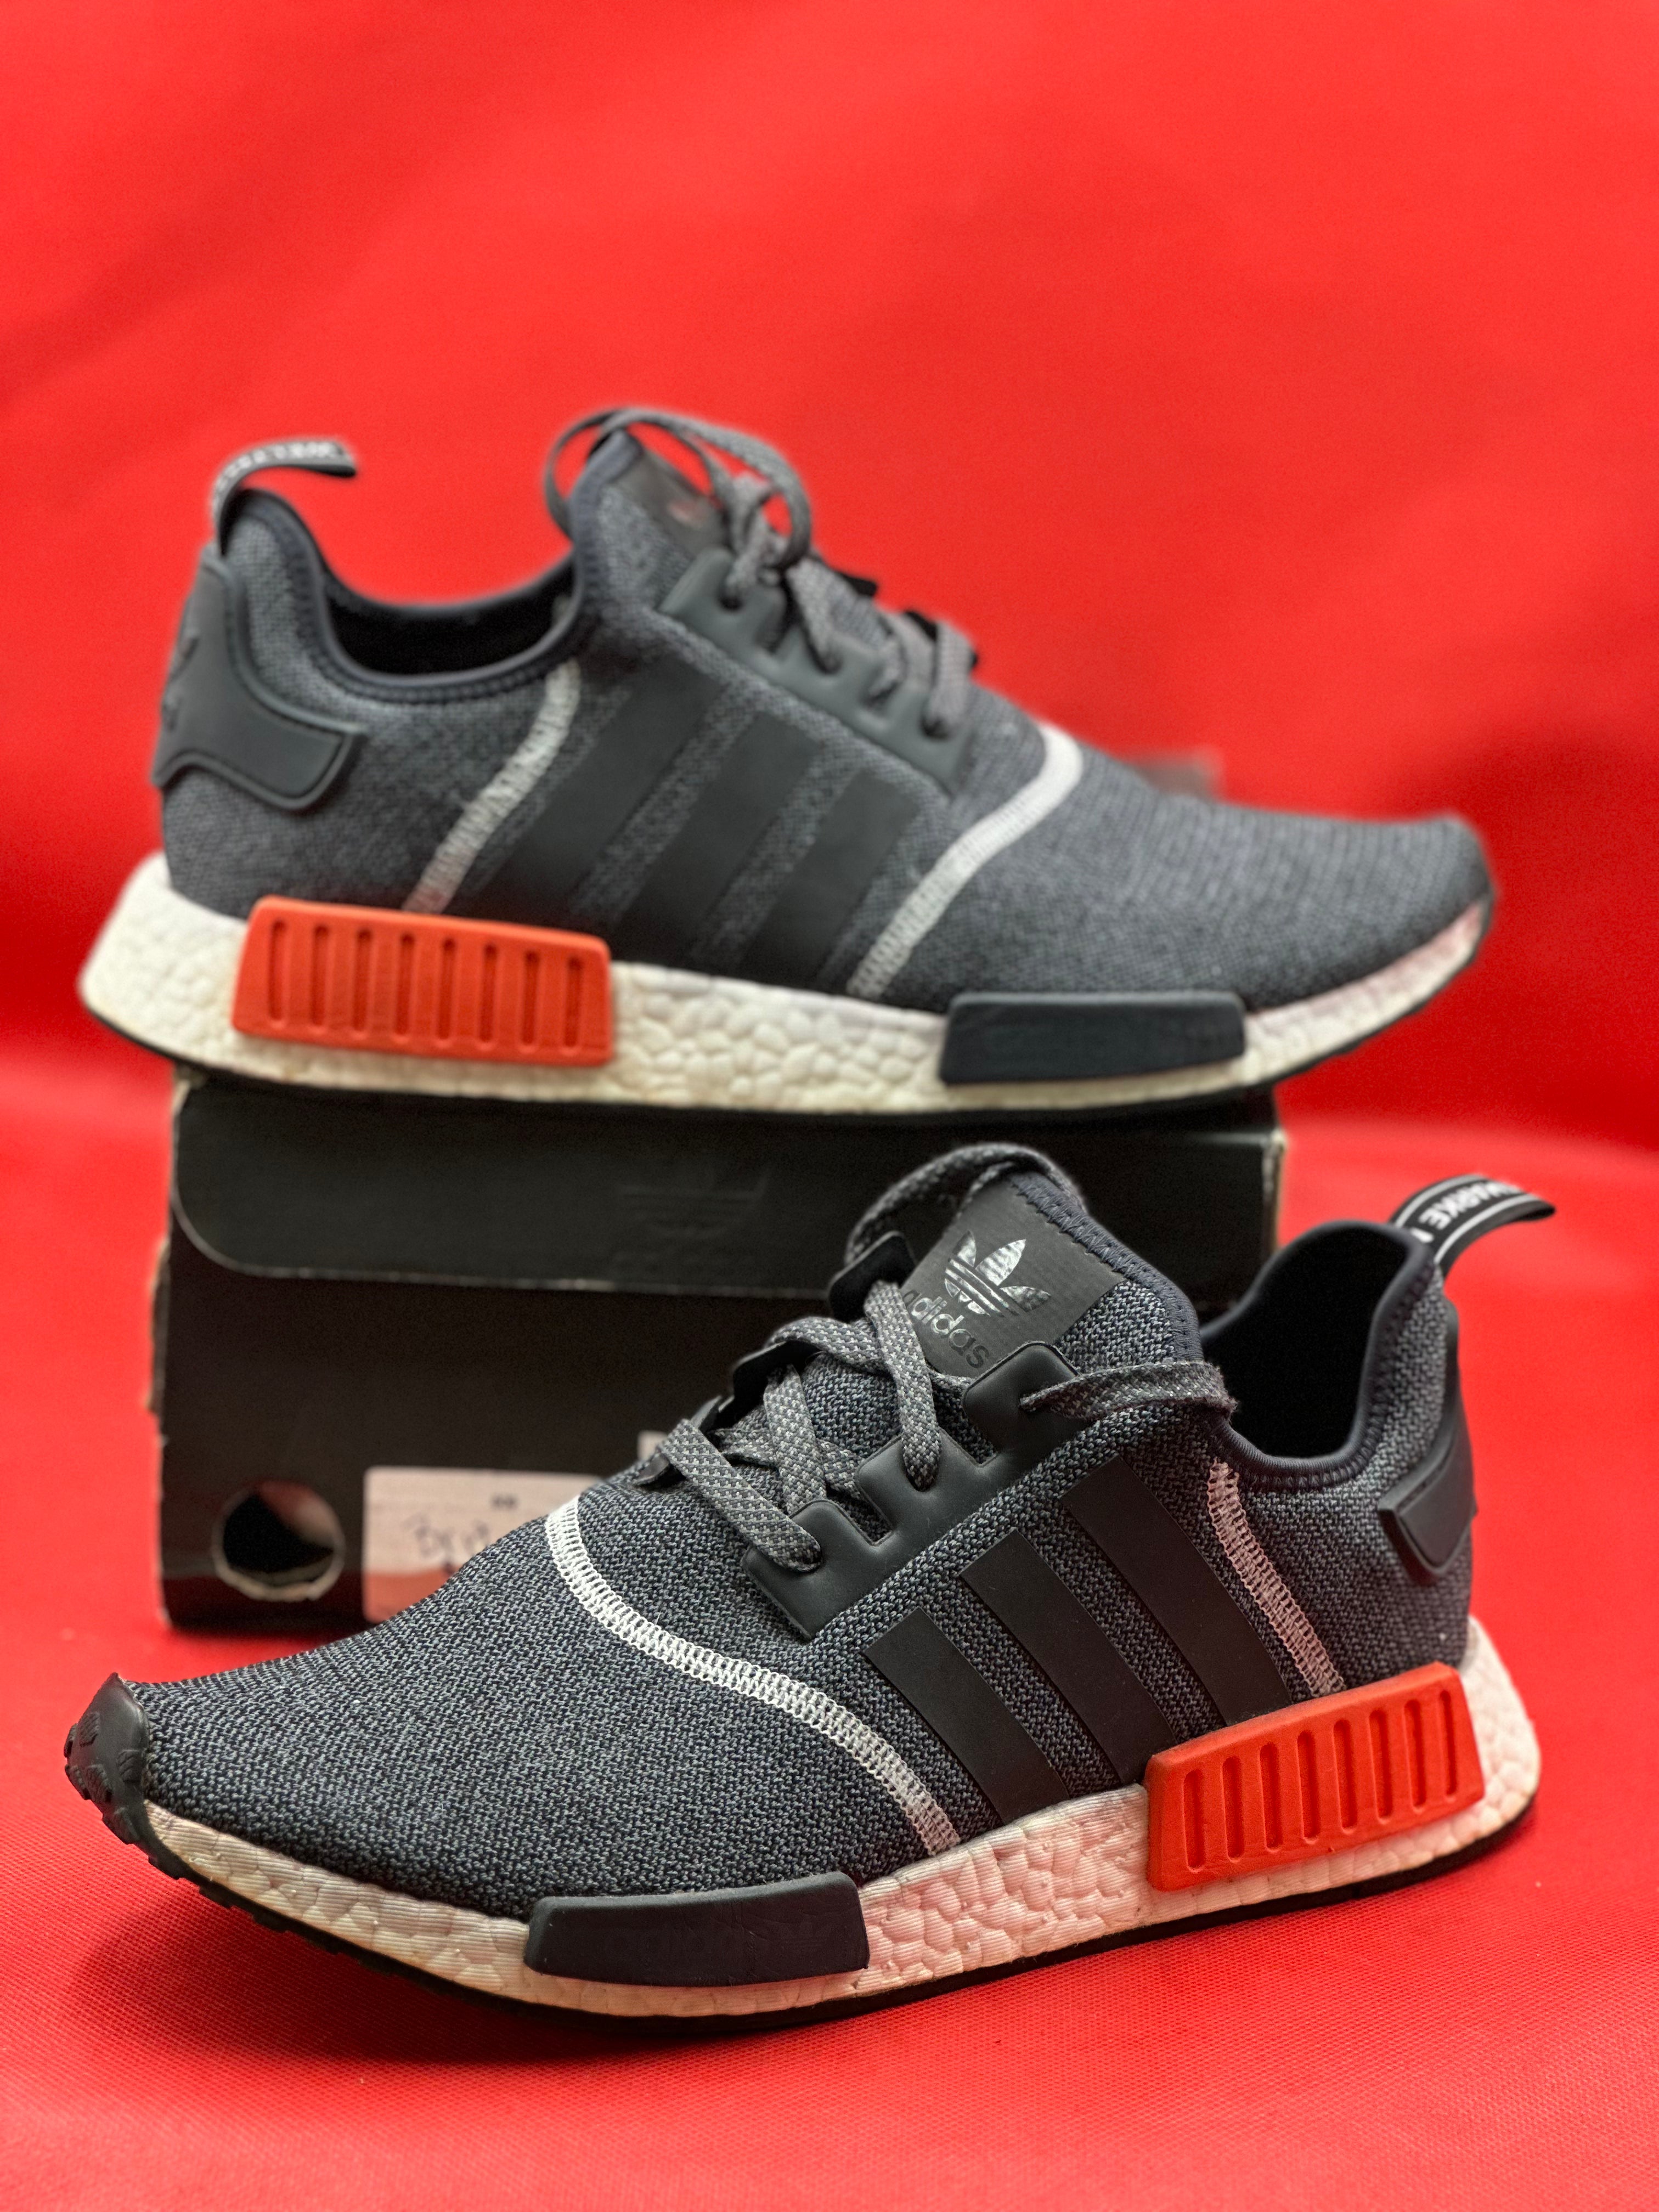 Grey red Nmd size 9.5